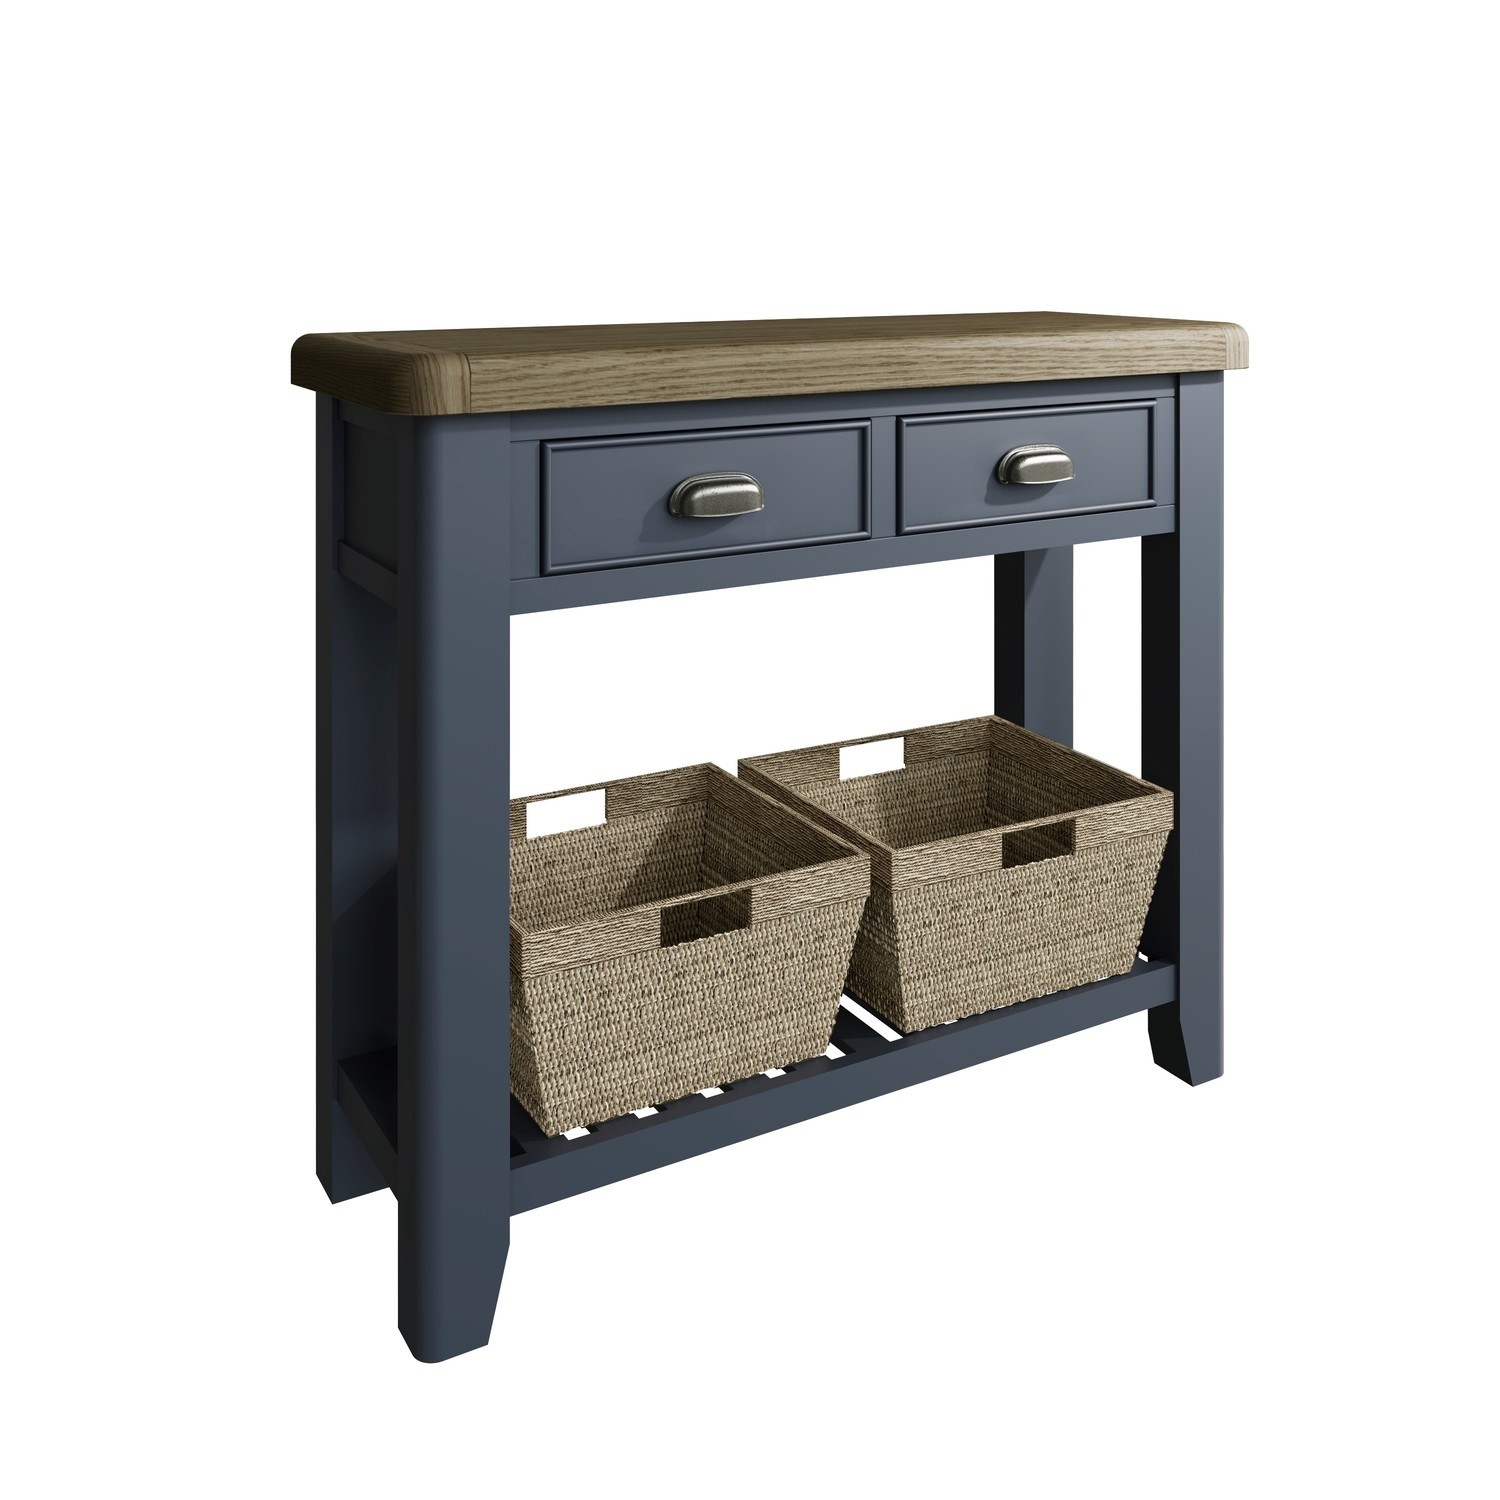 Read more about Oak & blue console table with wicker baskets